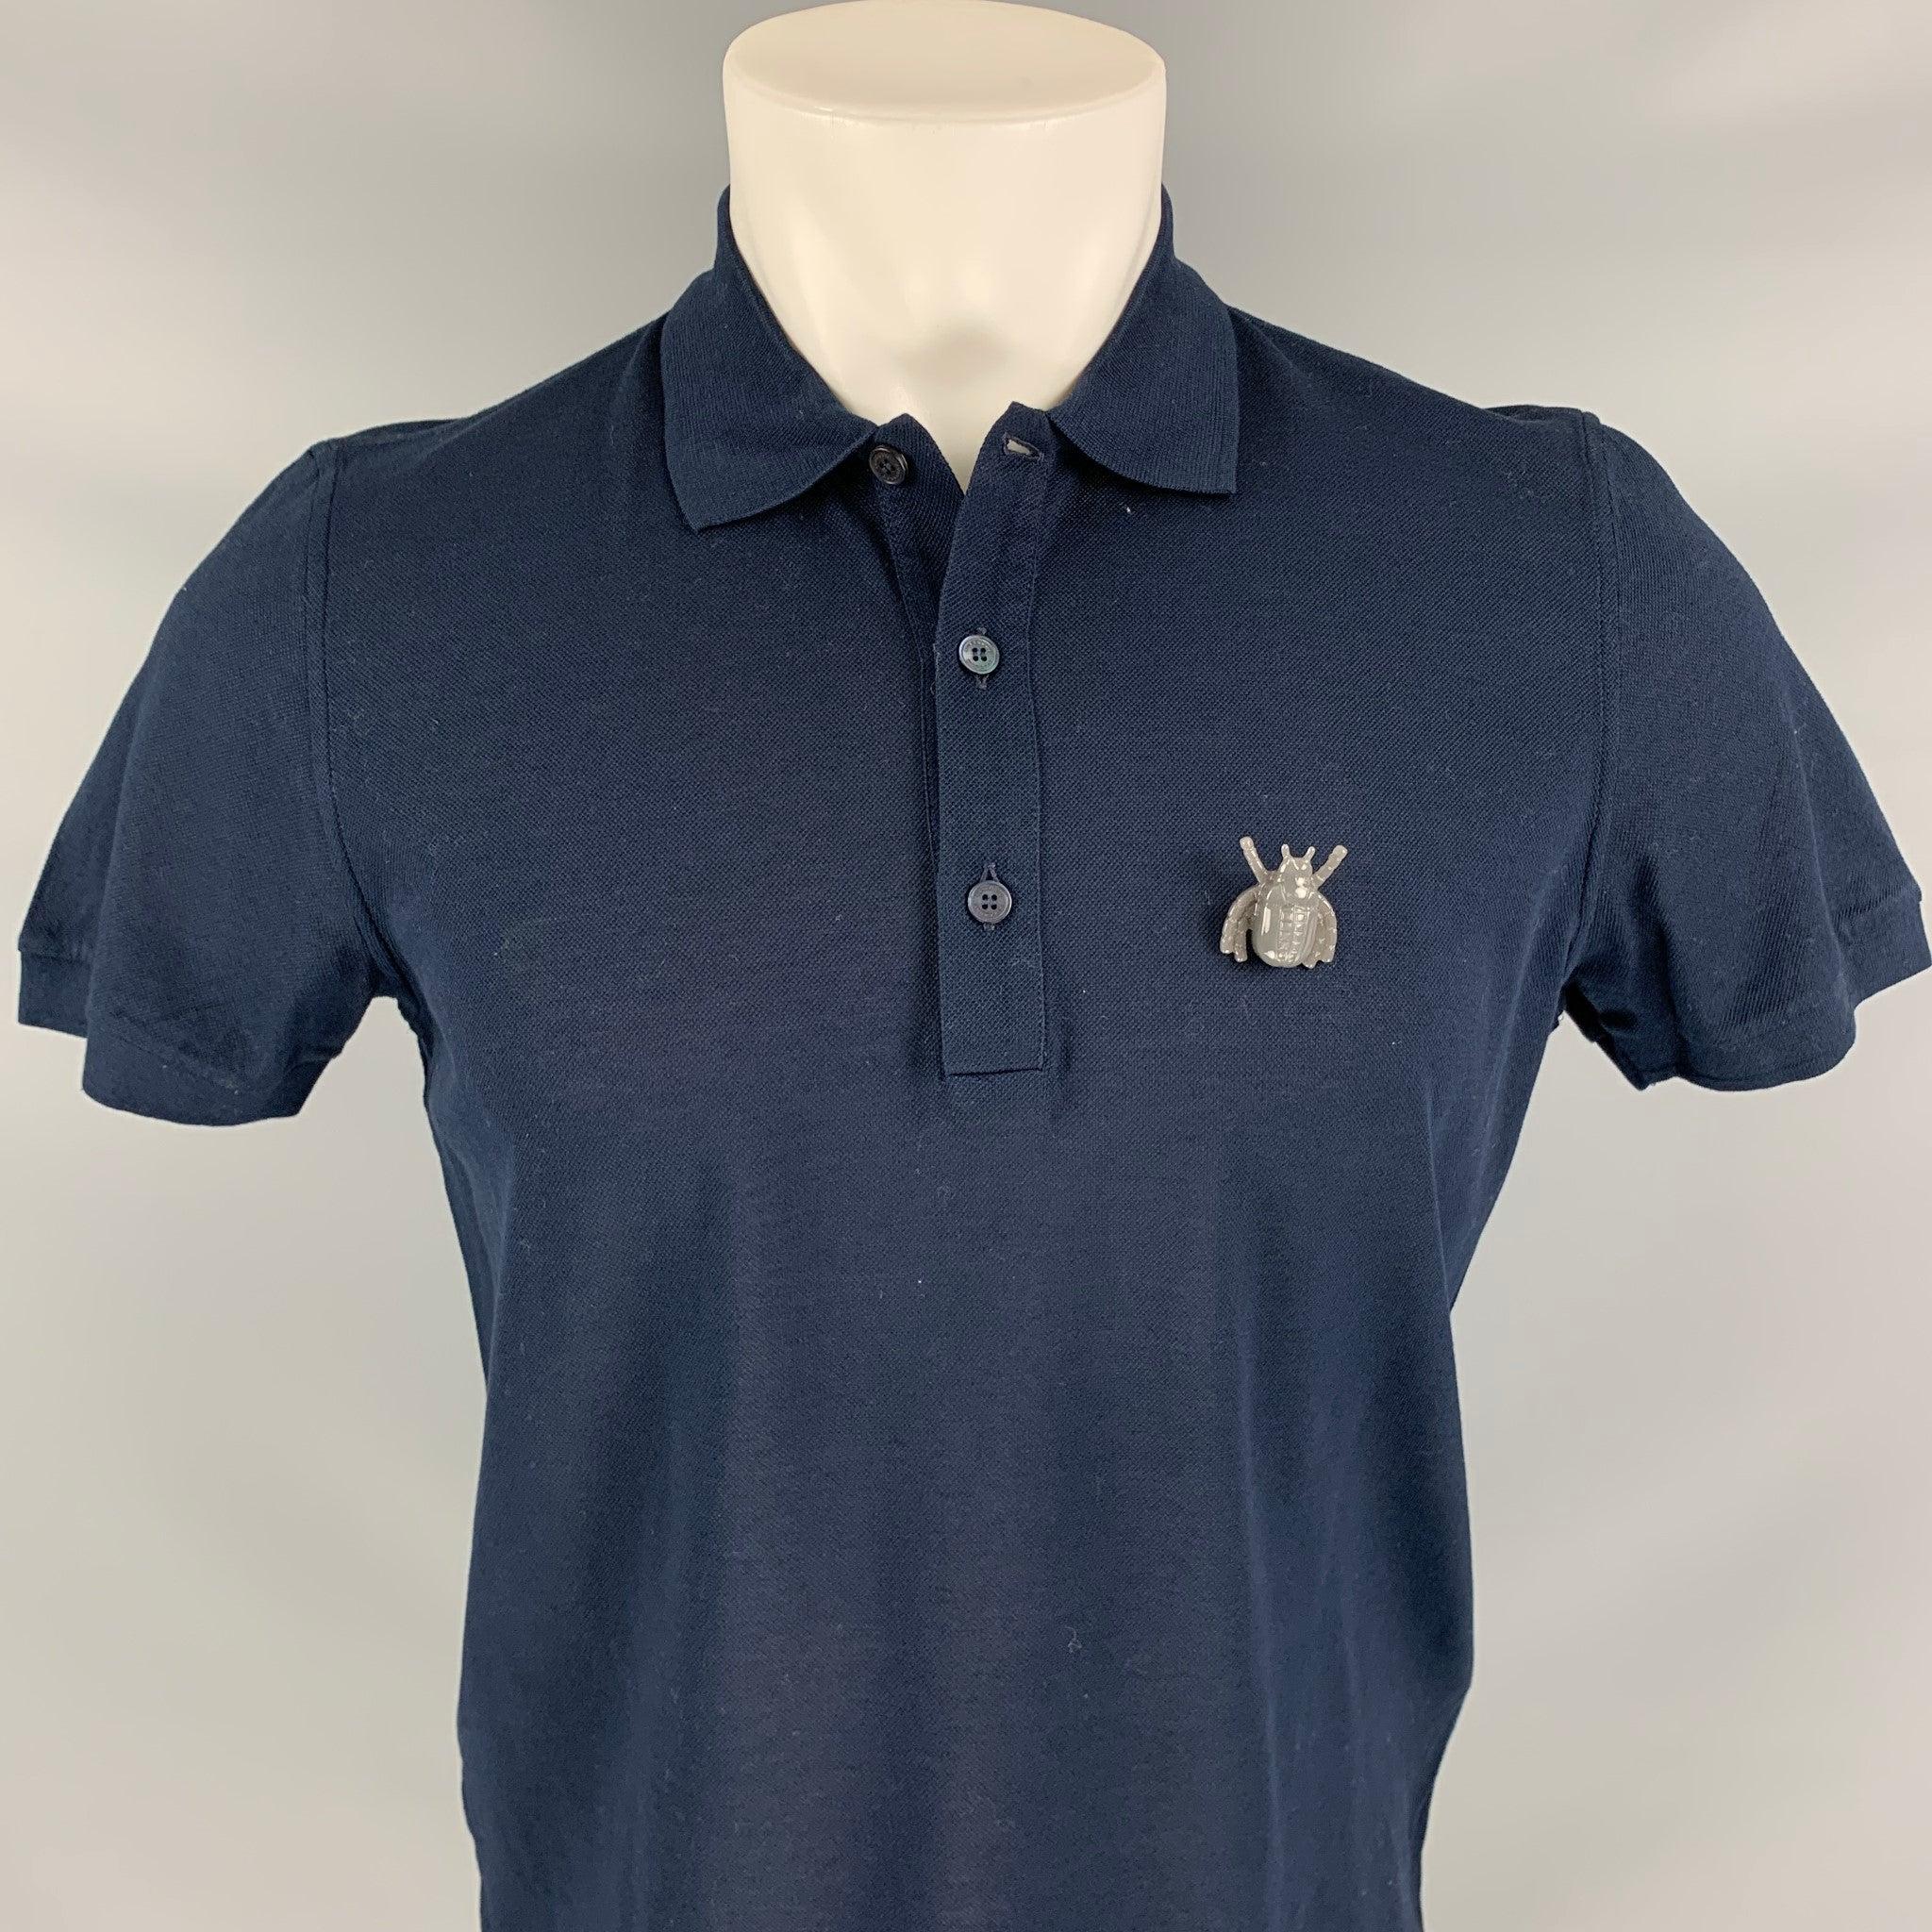 BURBERRY PRORSUM Fall 2015 polo comes in a navy cotton featuring a bug pin, spread collar, short sleeves, and a half buttoned closure.Very Good
Pre-Owned Condition. 

Marked:   M 

Measurements: 
 
Shoulder:
16.5 inches  Chest: 40 inches  Sleeve: 8